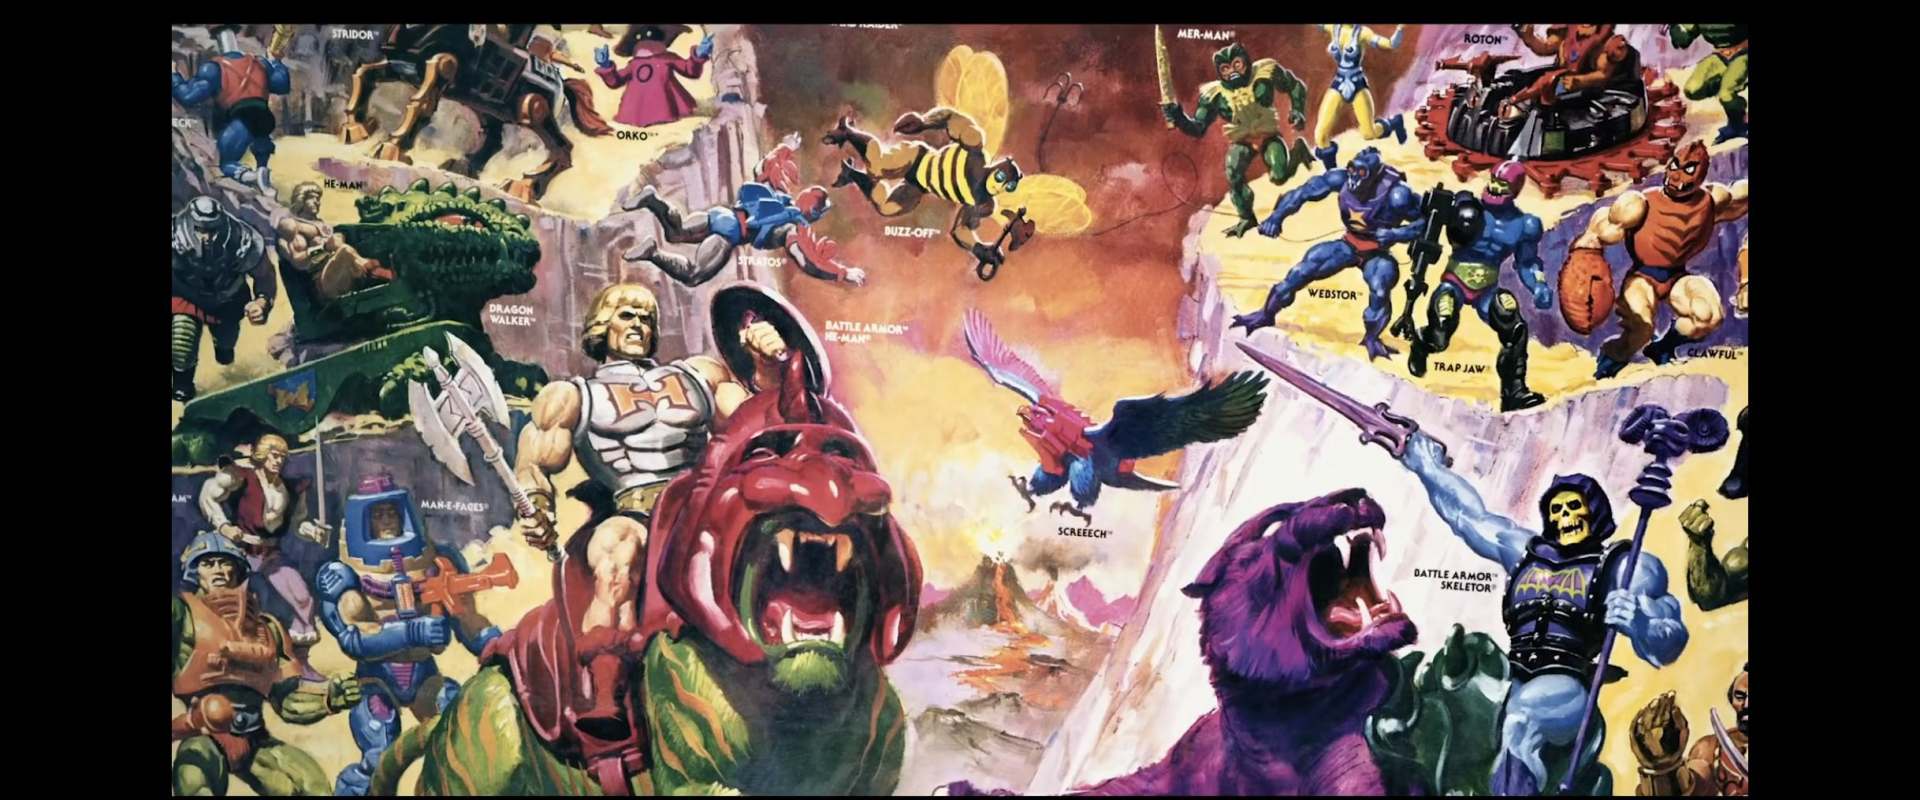 Power of Grayskull: The Definitive History of He-Man and the Masters of the Universe background 2